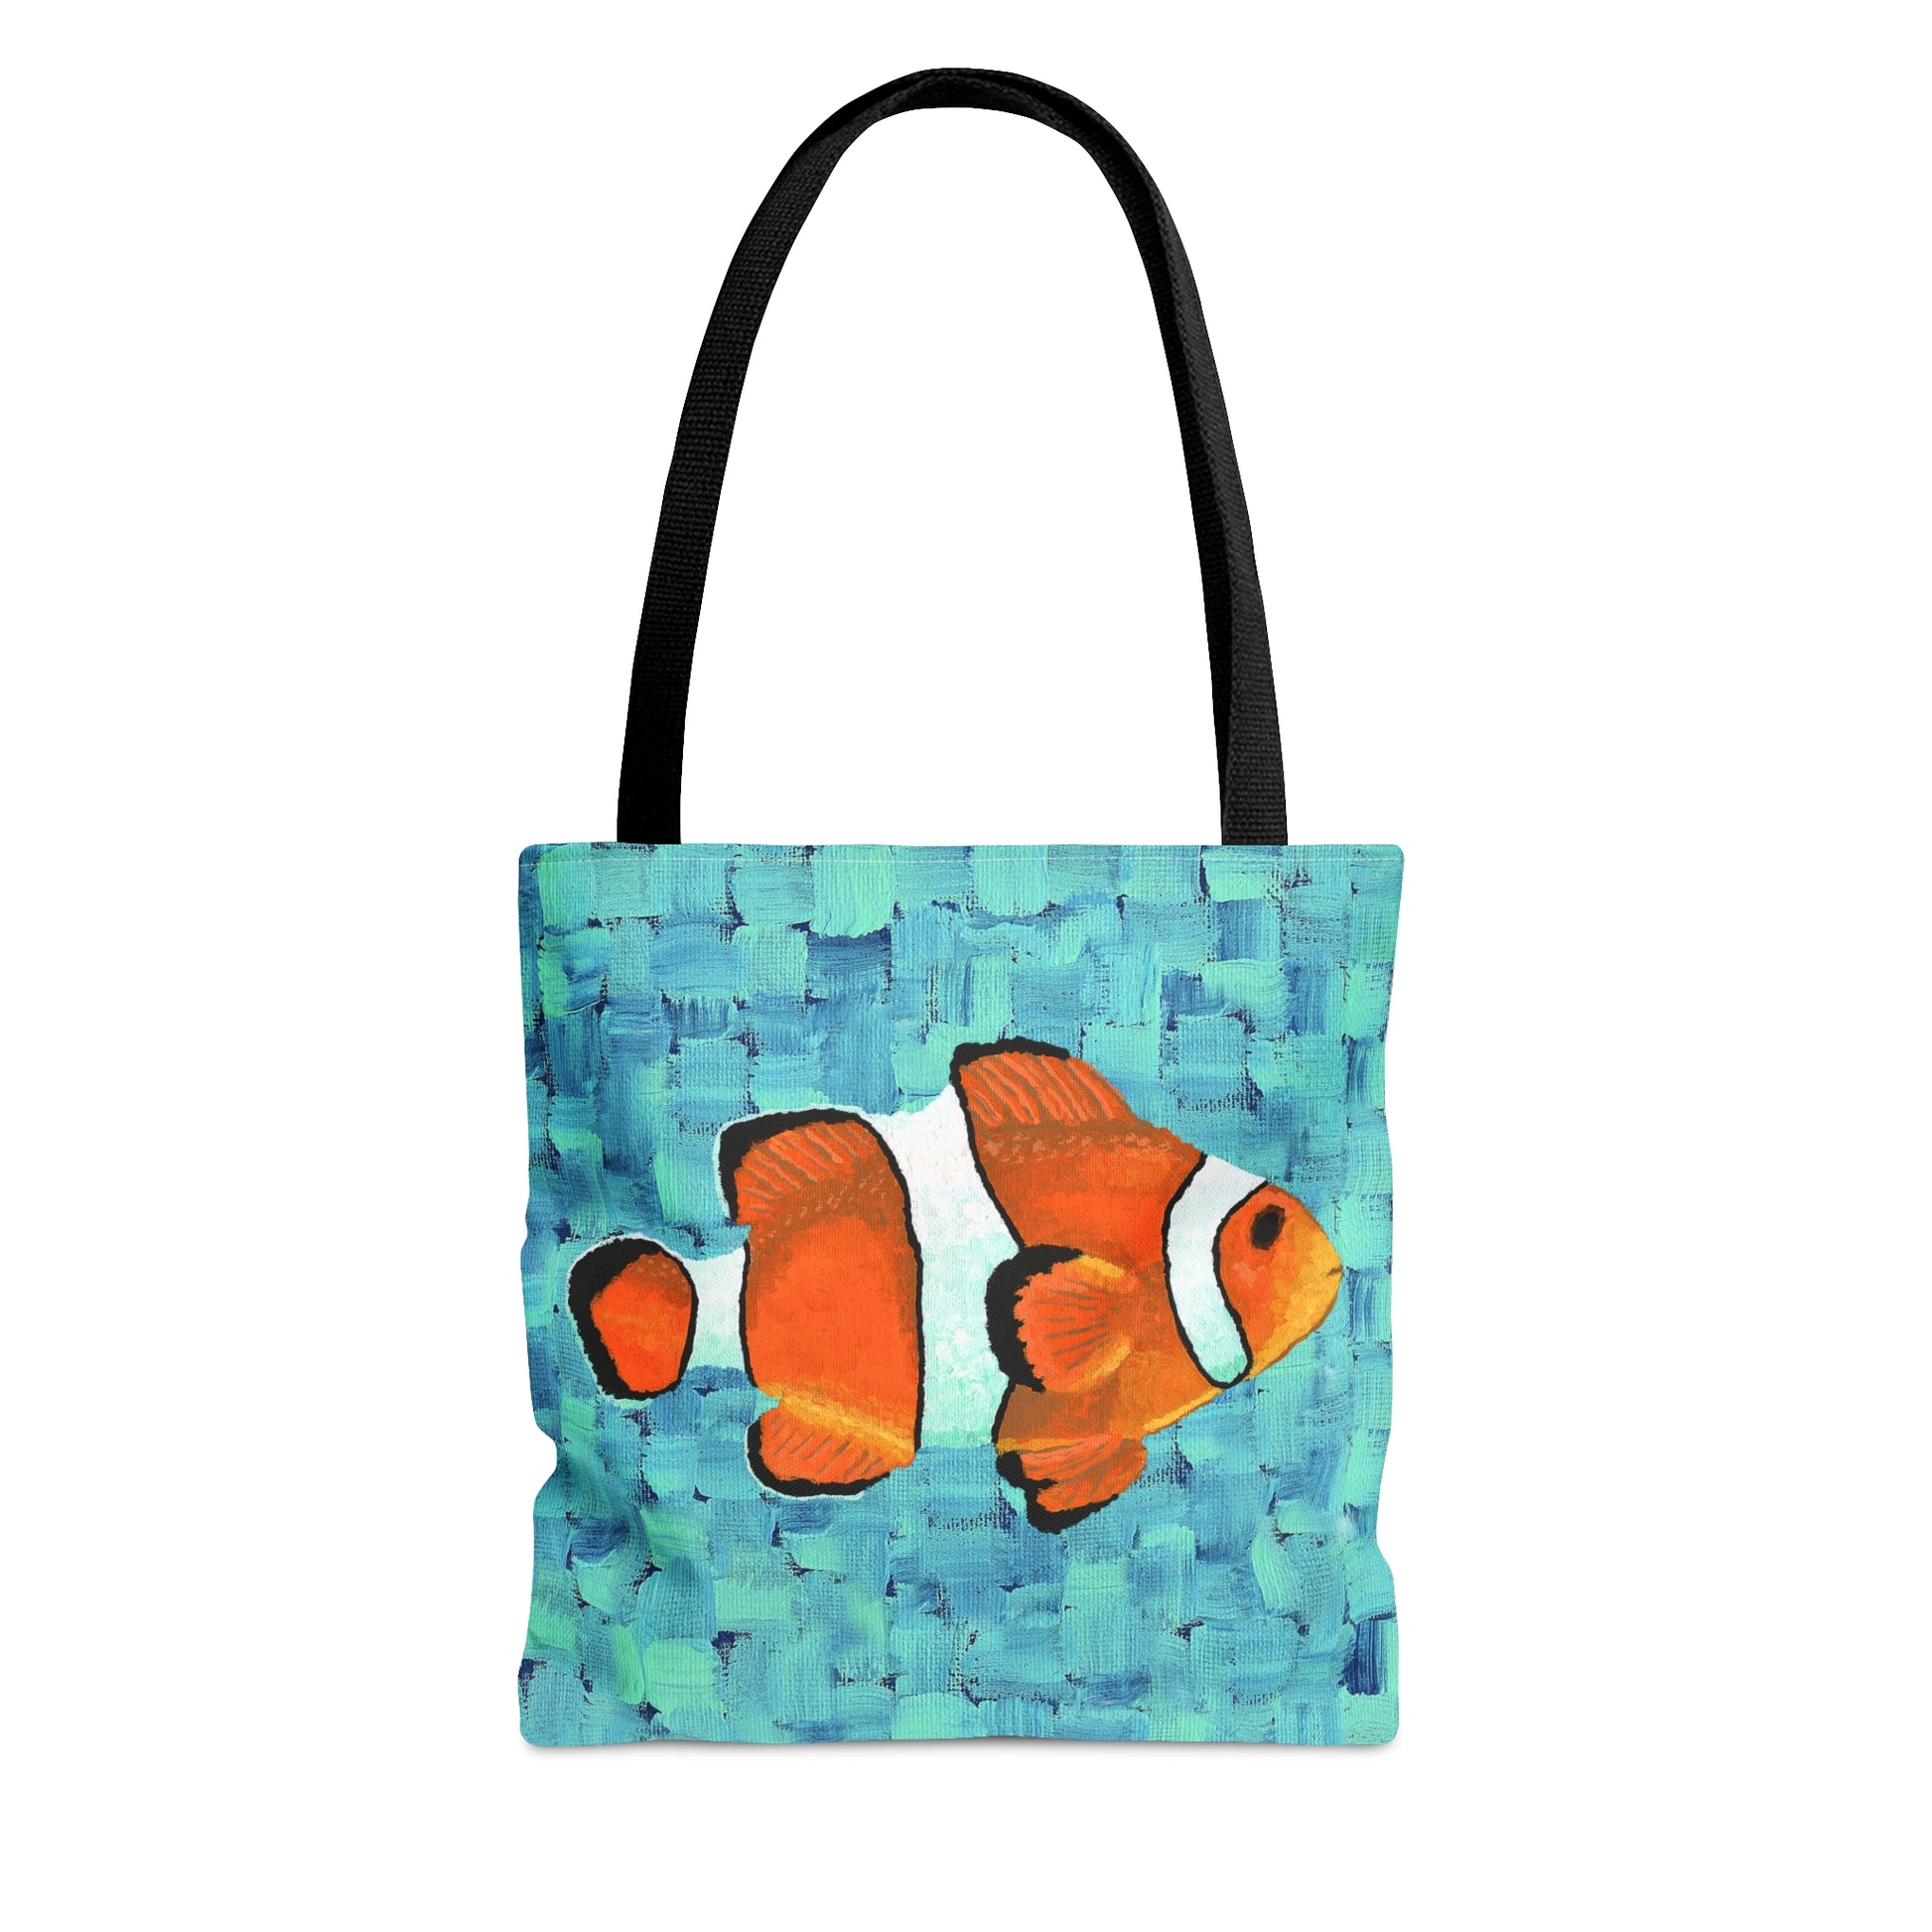 A vibrant orange clown fish tote bag, perfect for carrying your essentials to the beach or aquarium.